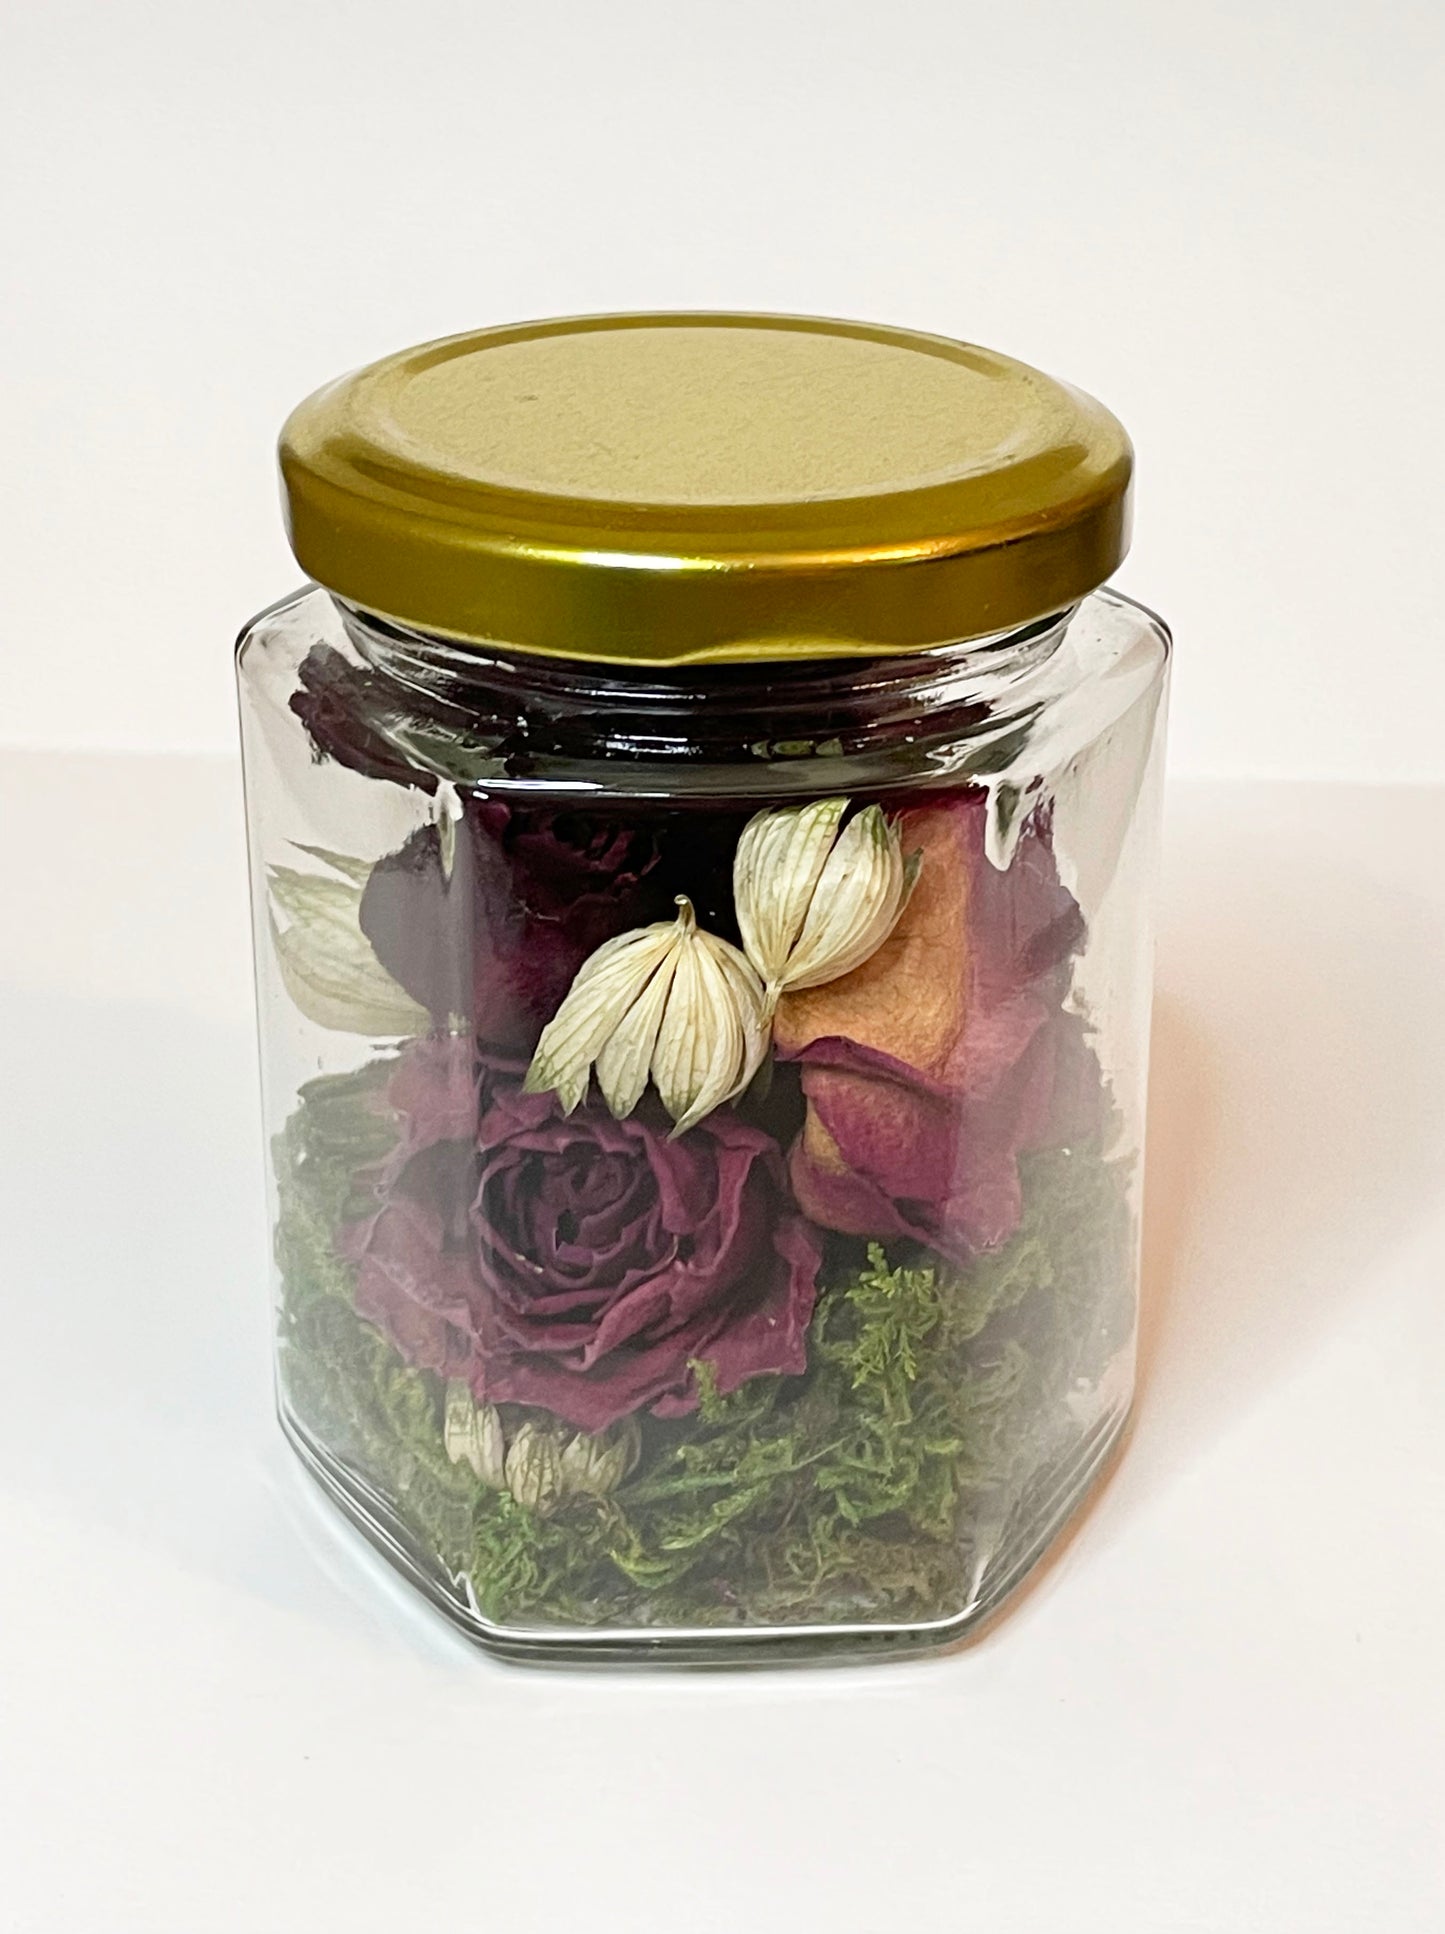 Set of 2: Dried Roses with Astrantia Blossoms in Honeycomb Shaped Glass Jars with Gold Lids